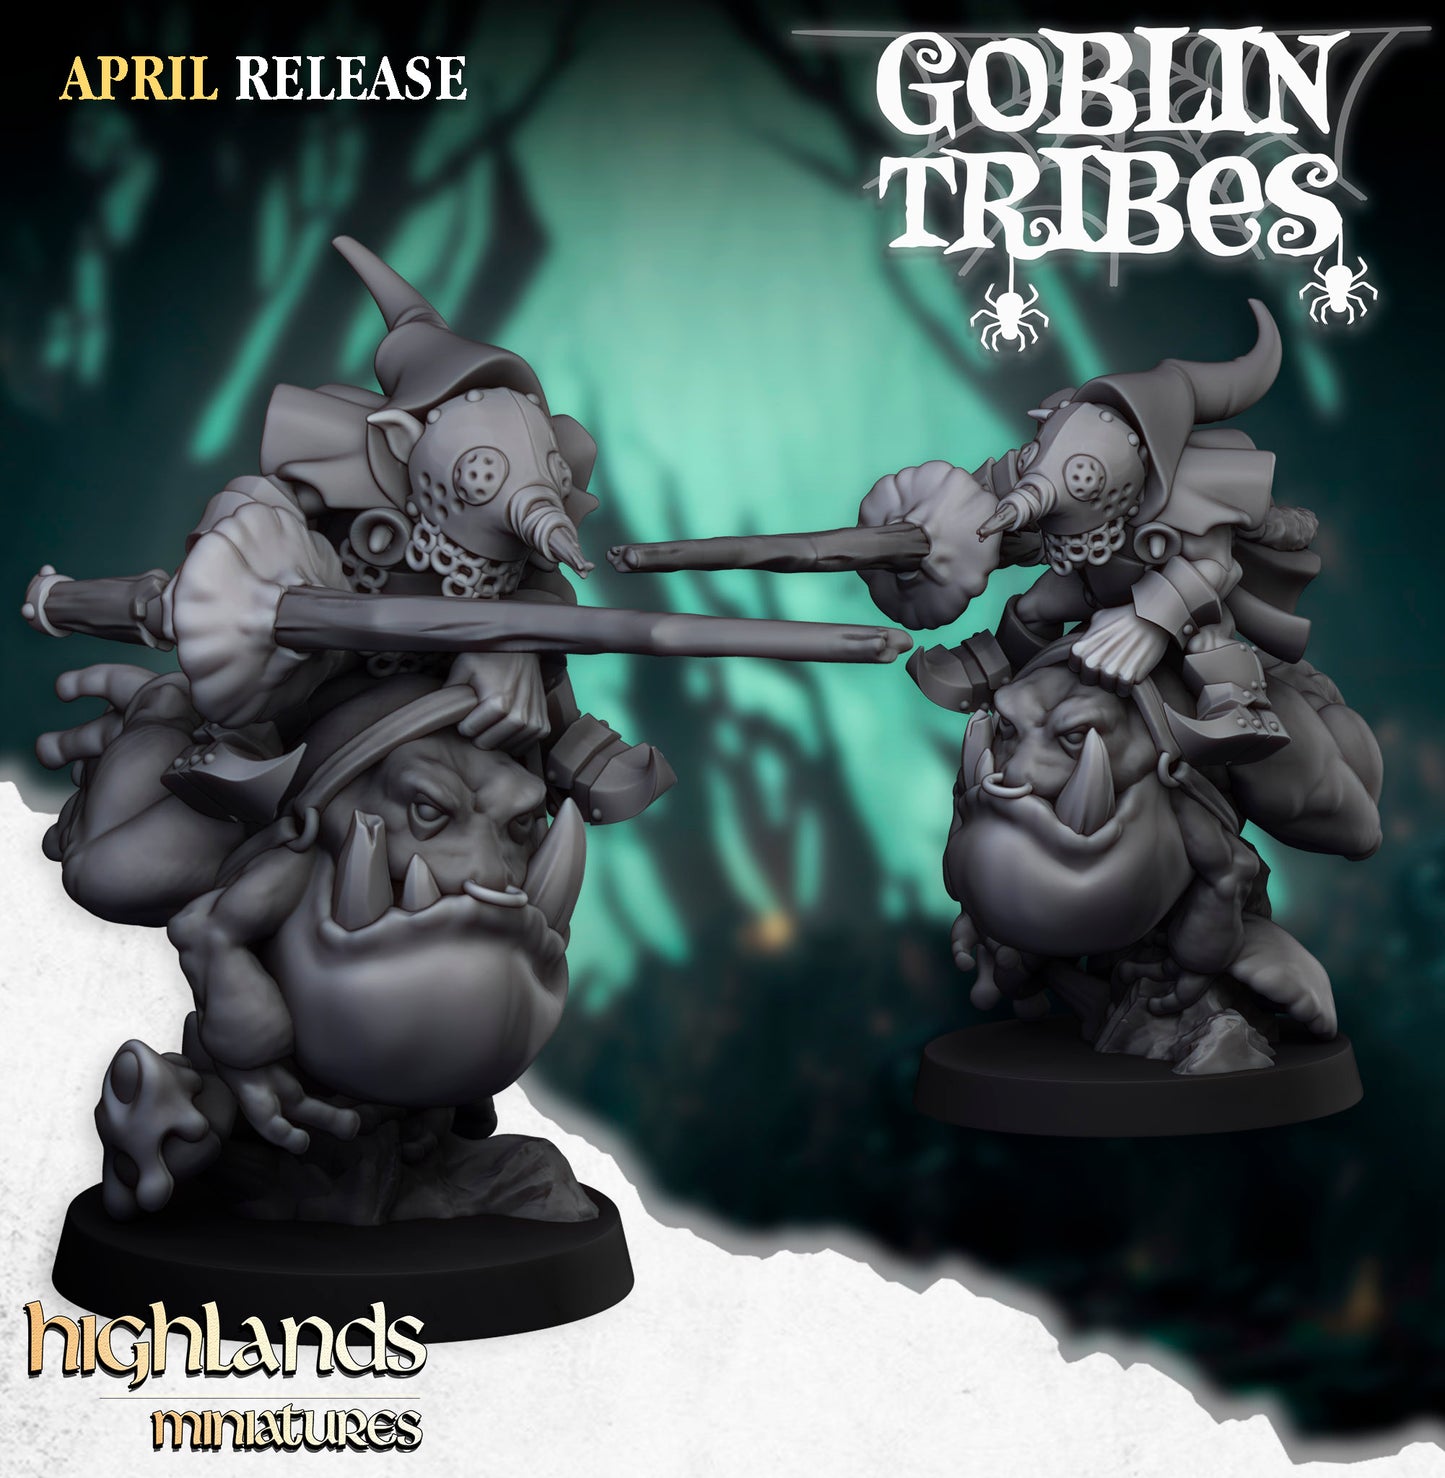 Swamp Goblin Frog Riders with Sticks [5 Models]